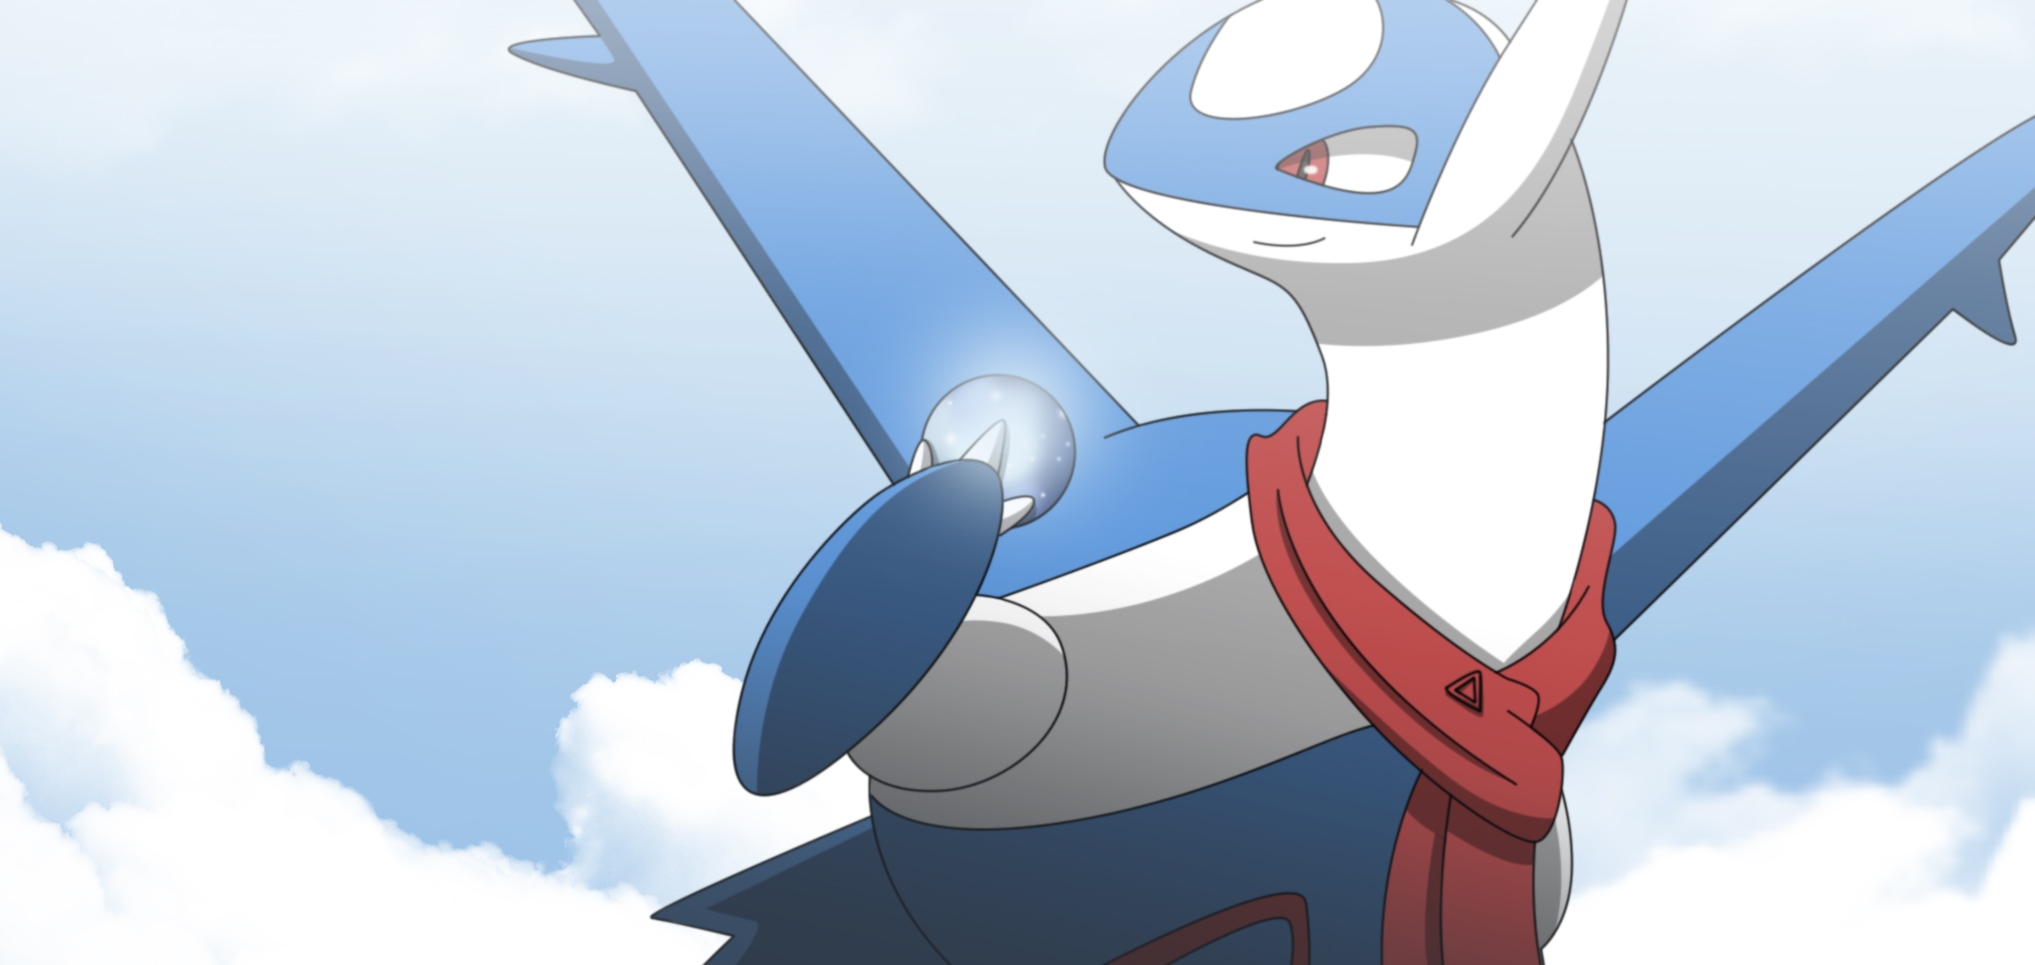 commission__latios_and_souldew_by_all0412-dagvexw.jpg